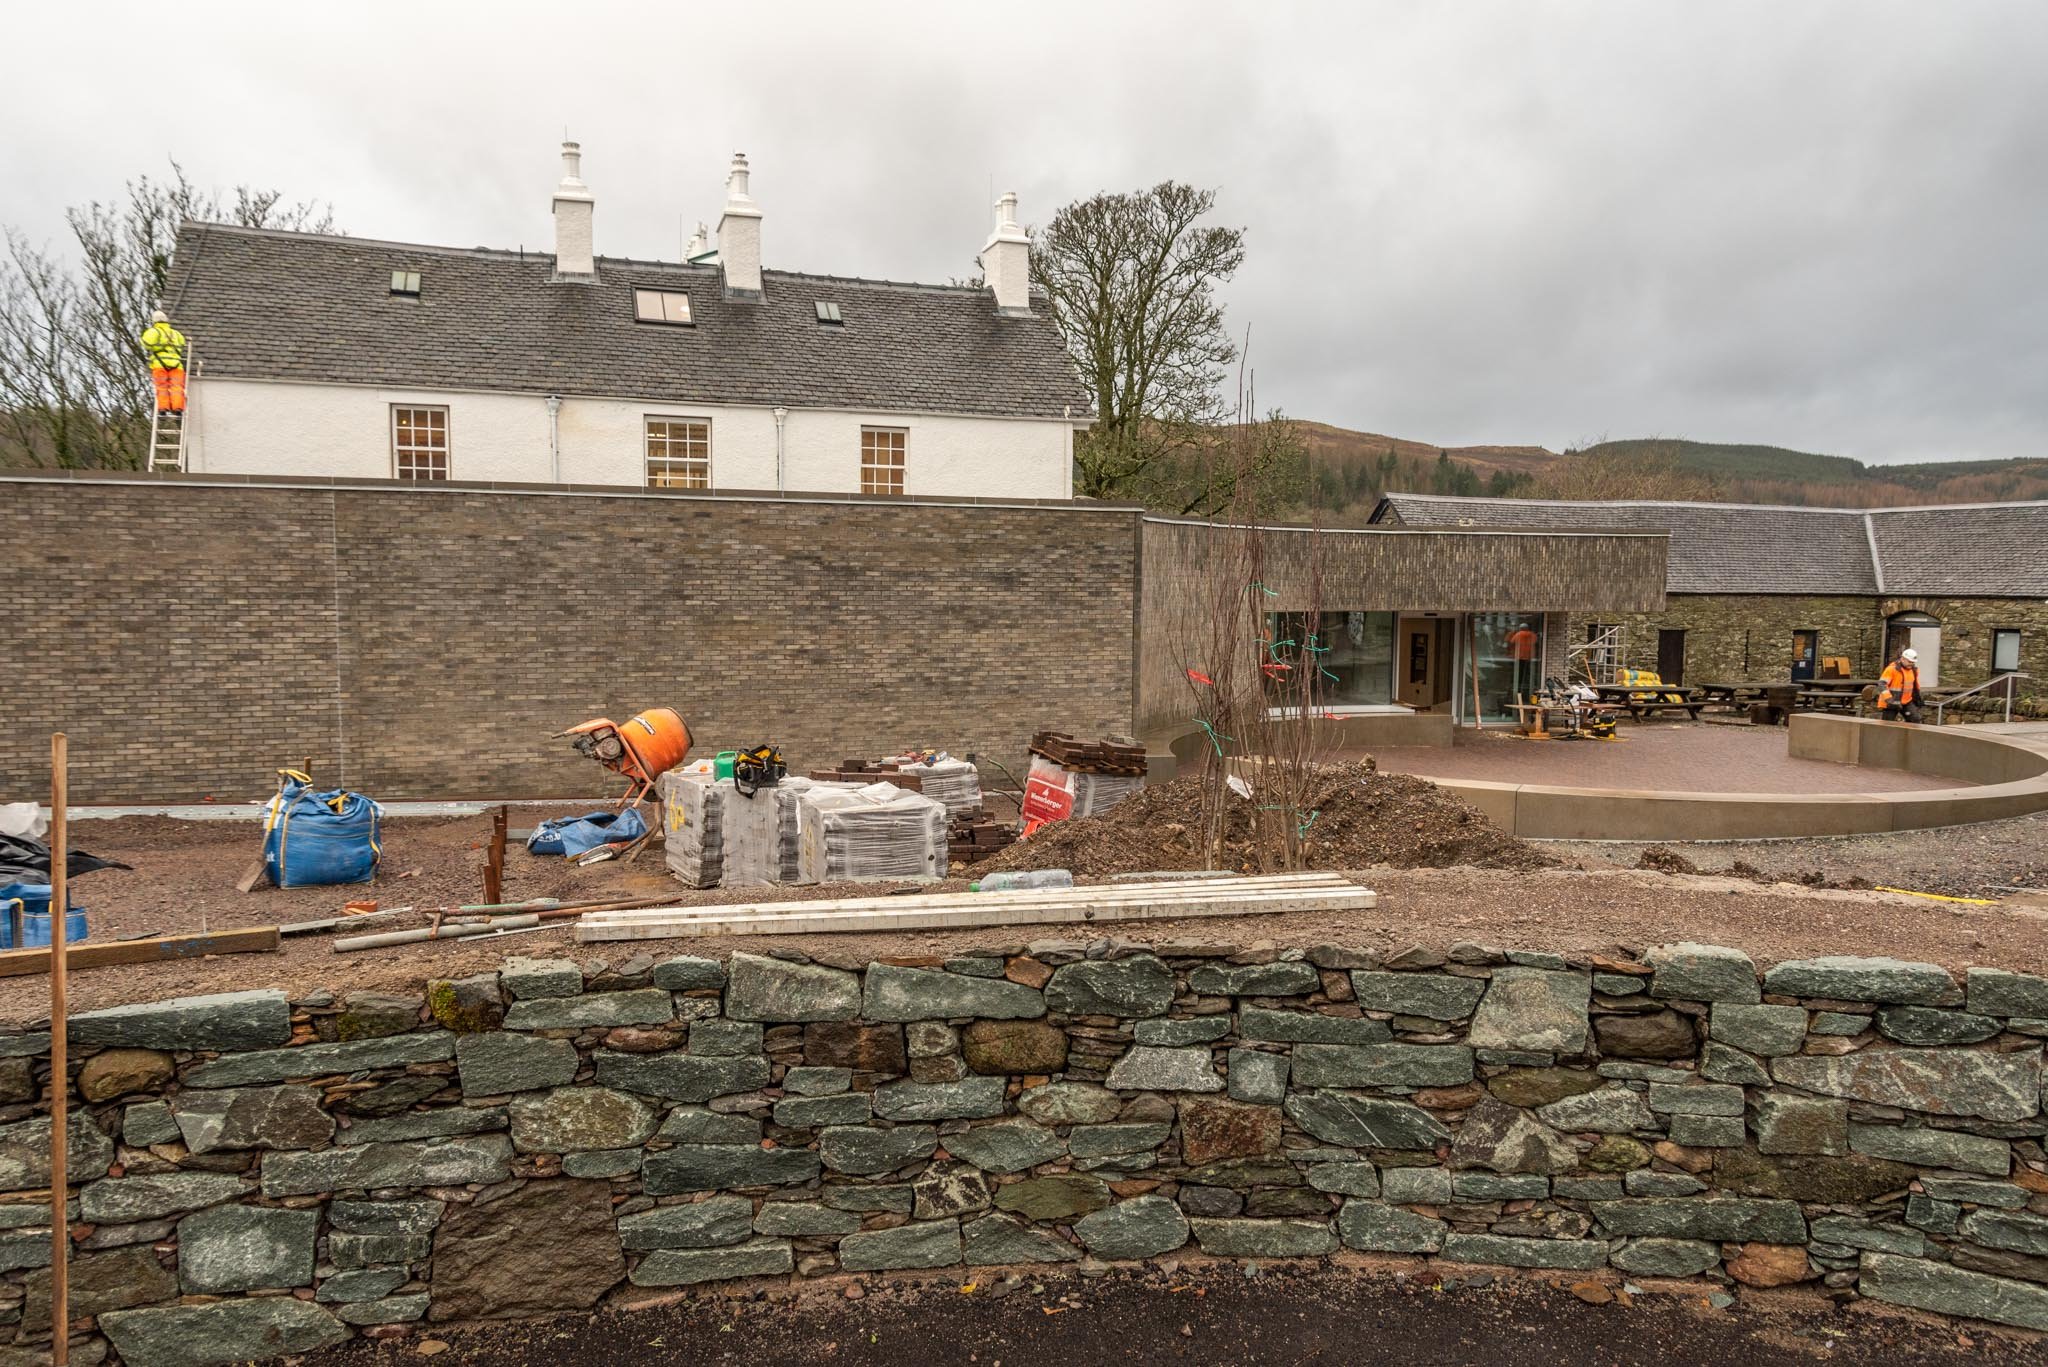  Landscaping works are in progress across the wider grounds of the Museum, including several new dry-stone walls. 